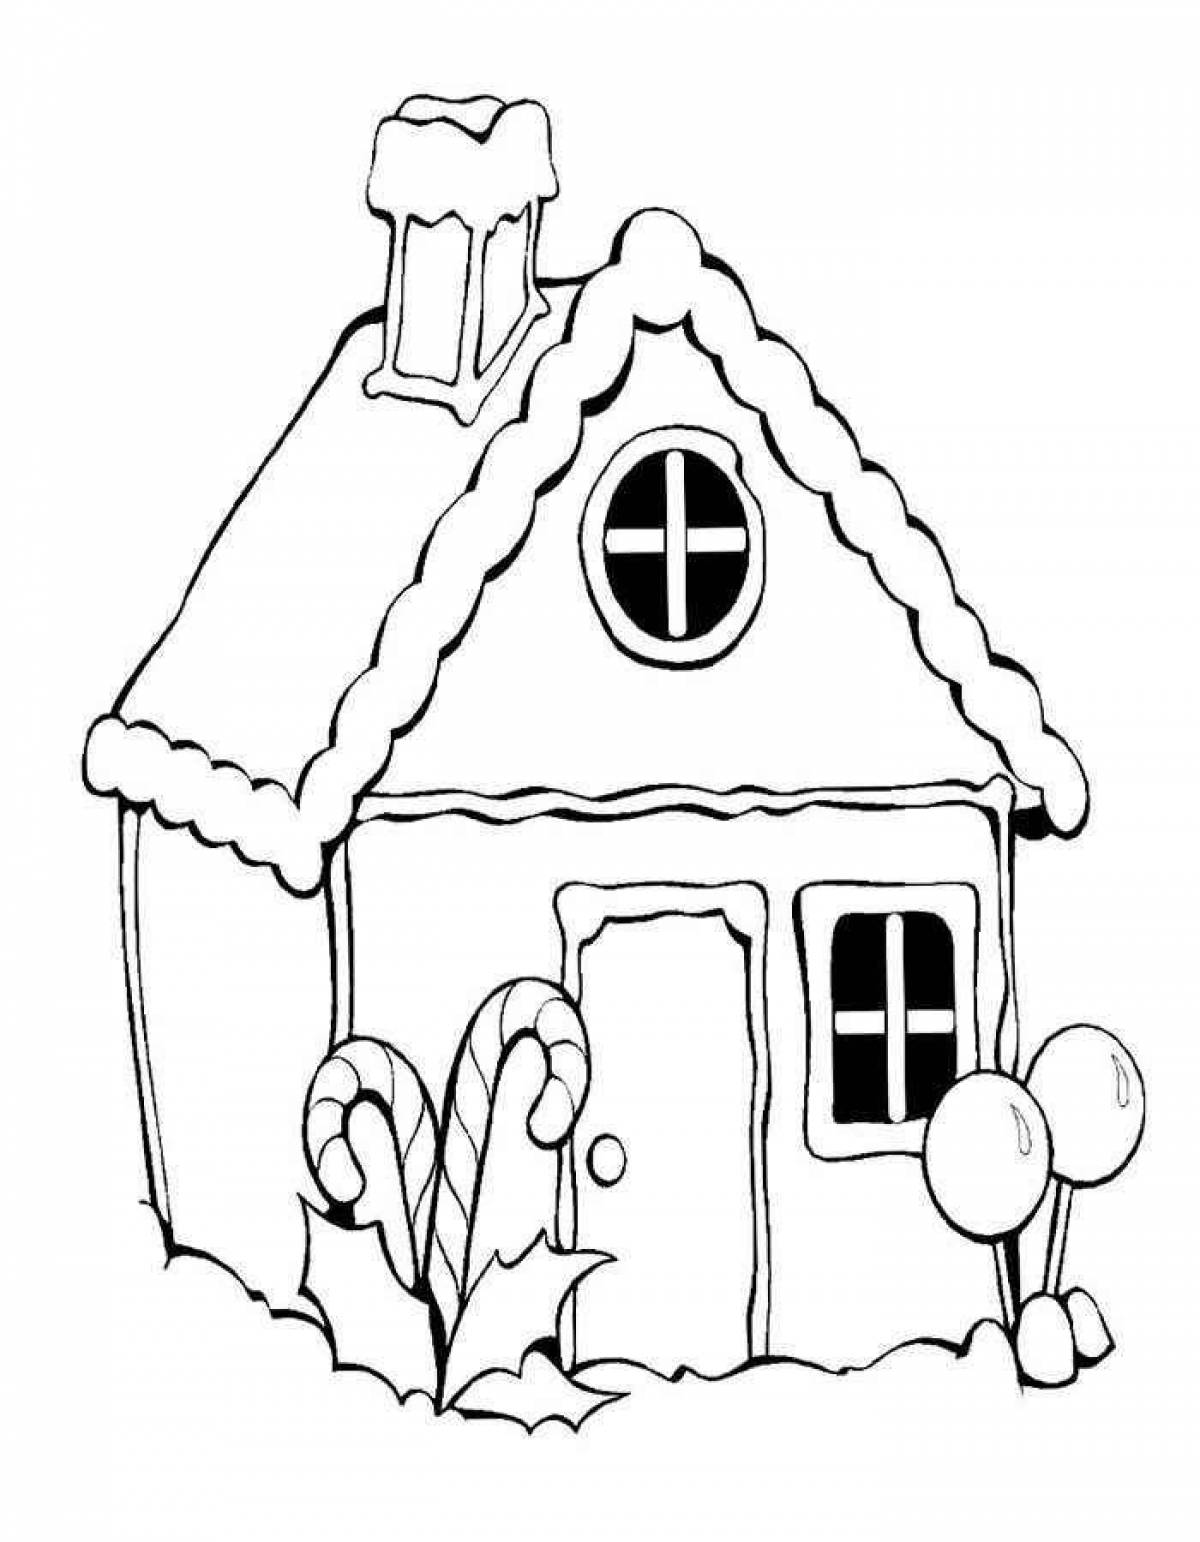 Crazy House Coloring Page